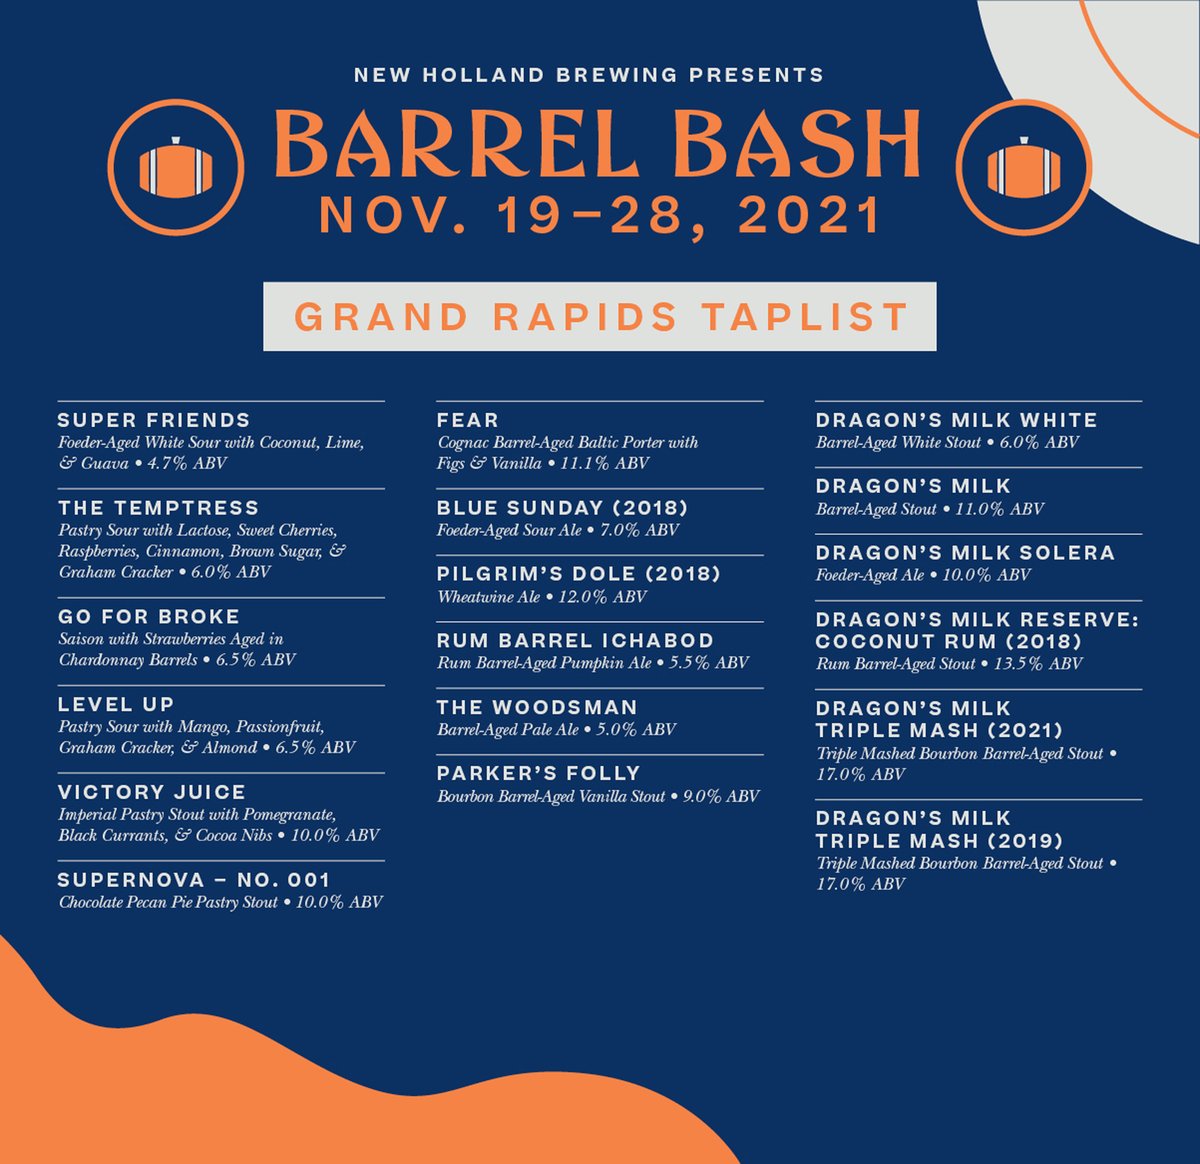 Let the BARREL BASH begin! Our pubs are ready and the taps are full of barrel-aged goodness. See you there!